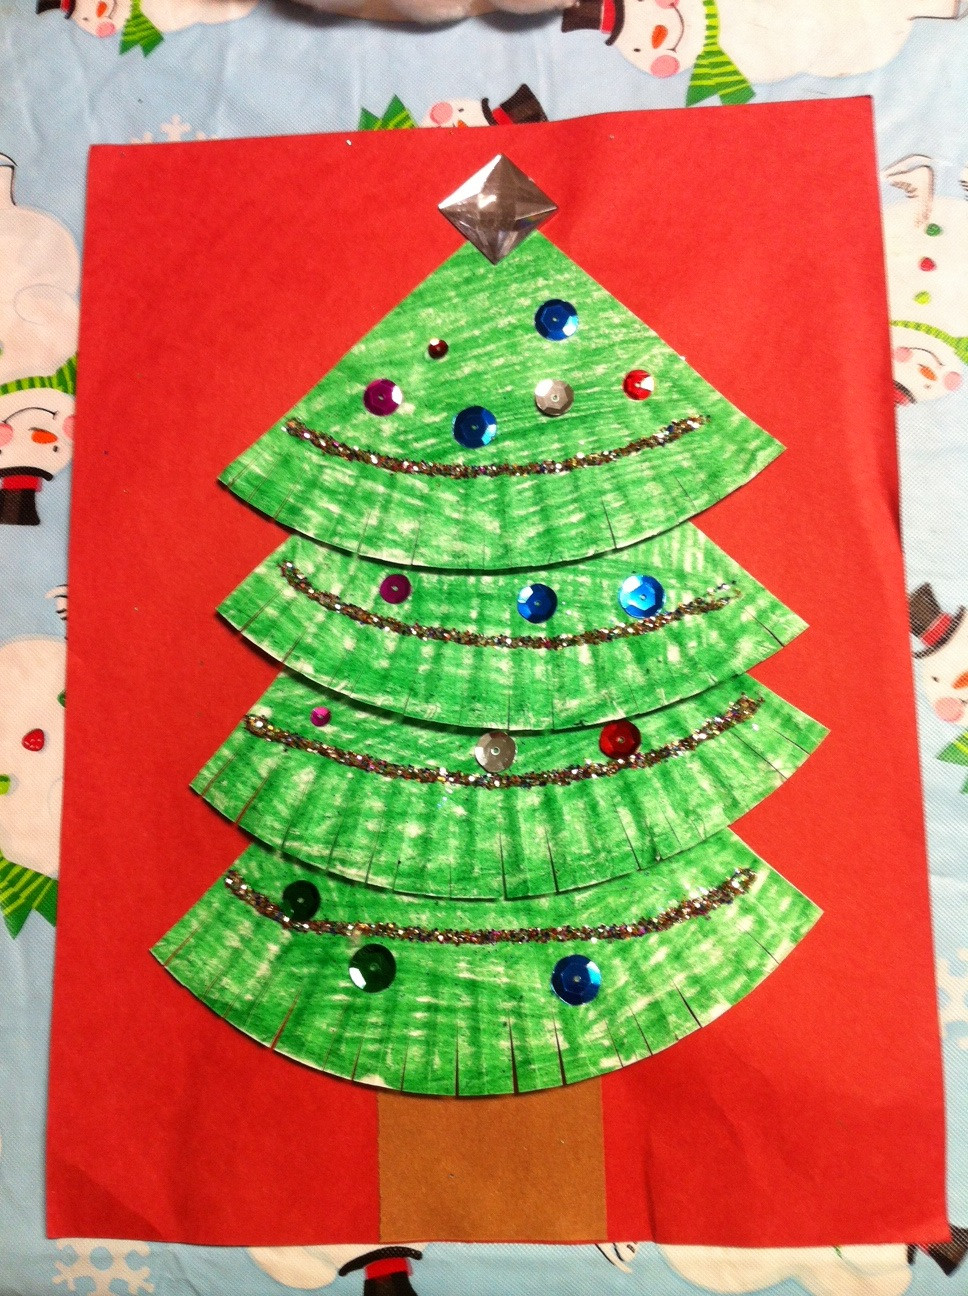 Christmas Arts And Craft Ideas For Toddlers
 Kindergarten Kids At Play Fun Winter & Christmas Craftivities